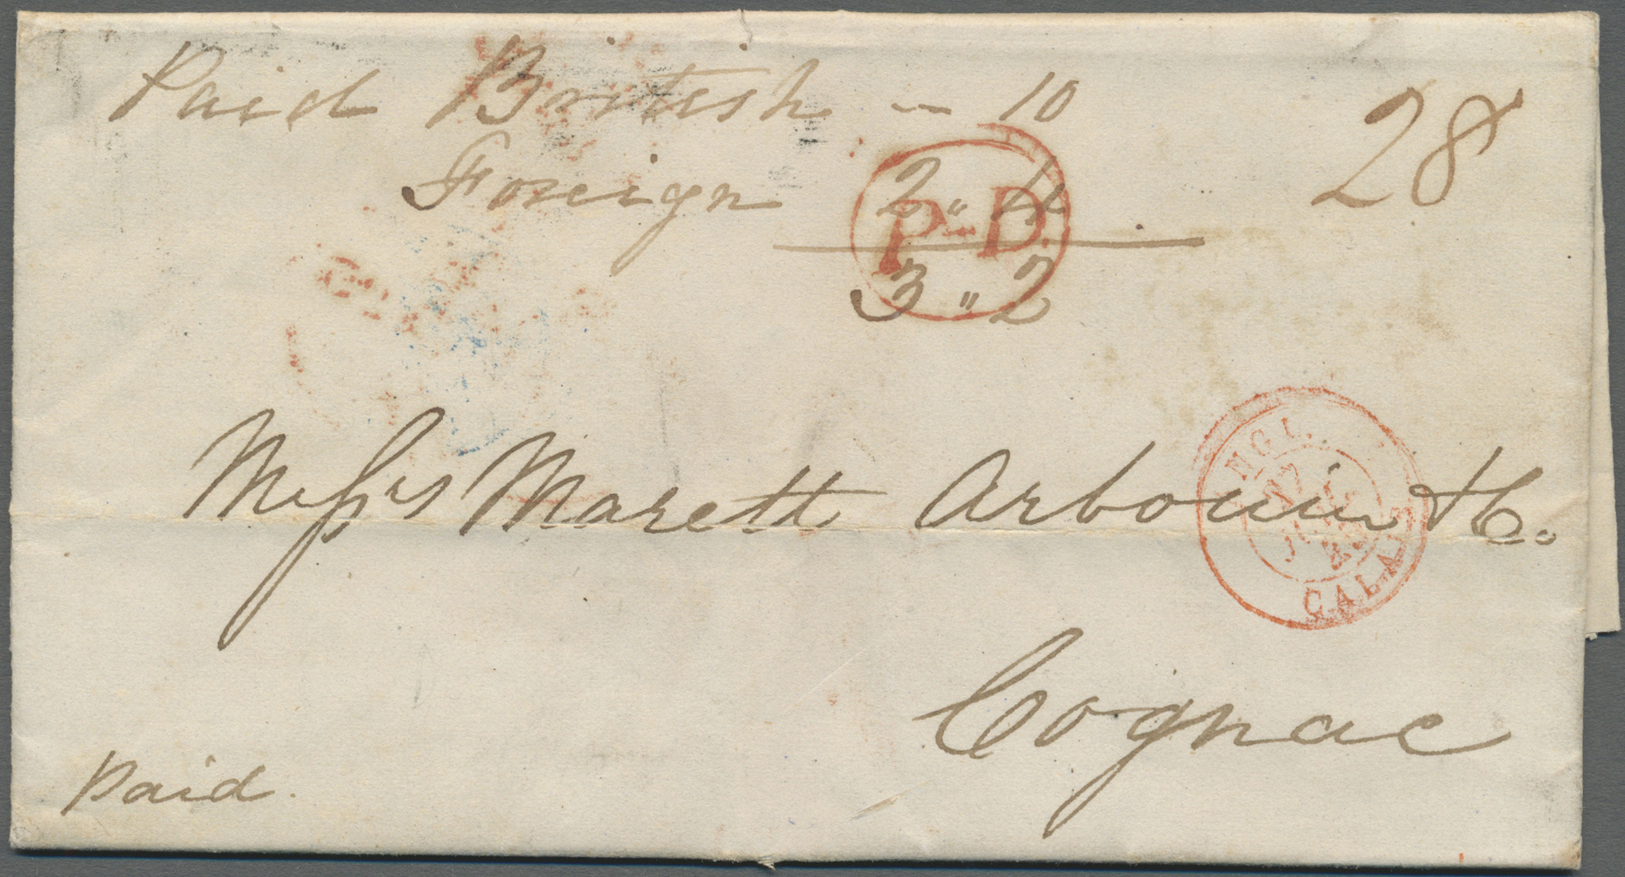 Br Großbritannien - Isle Of Man: 1840. Stampless Envelope To France Cancelled By Douglas/lsle Of Man Circular Dat - Isle Of Man